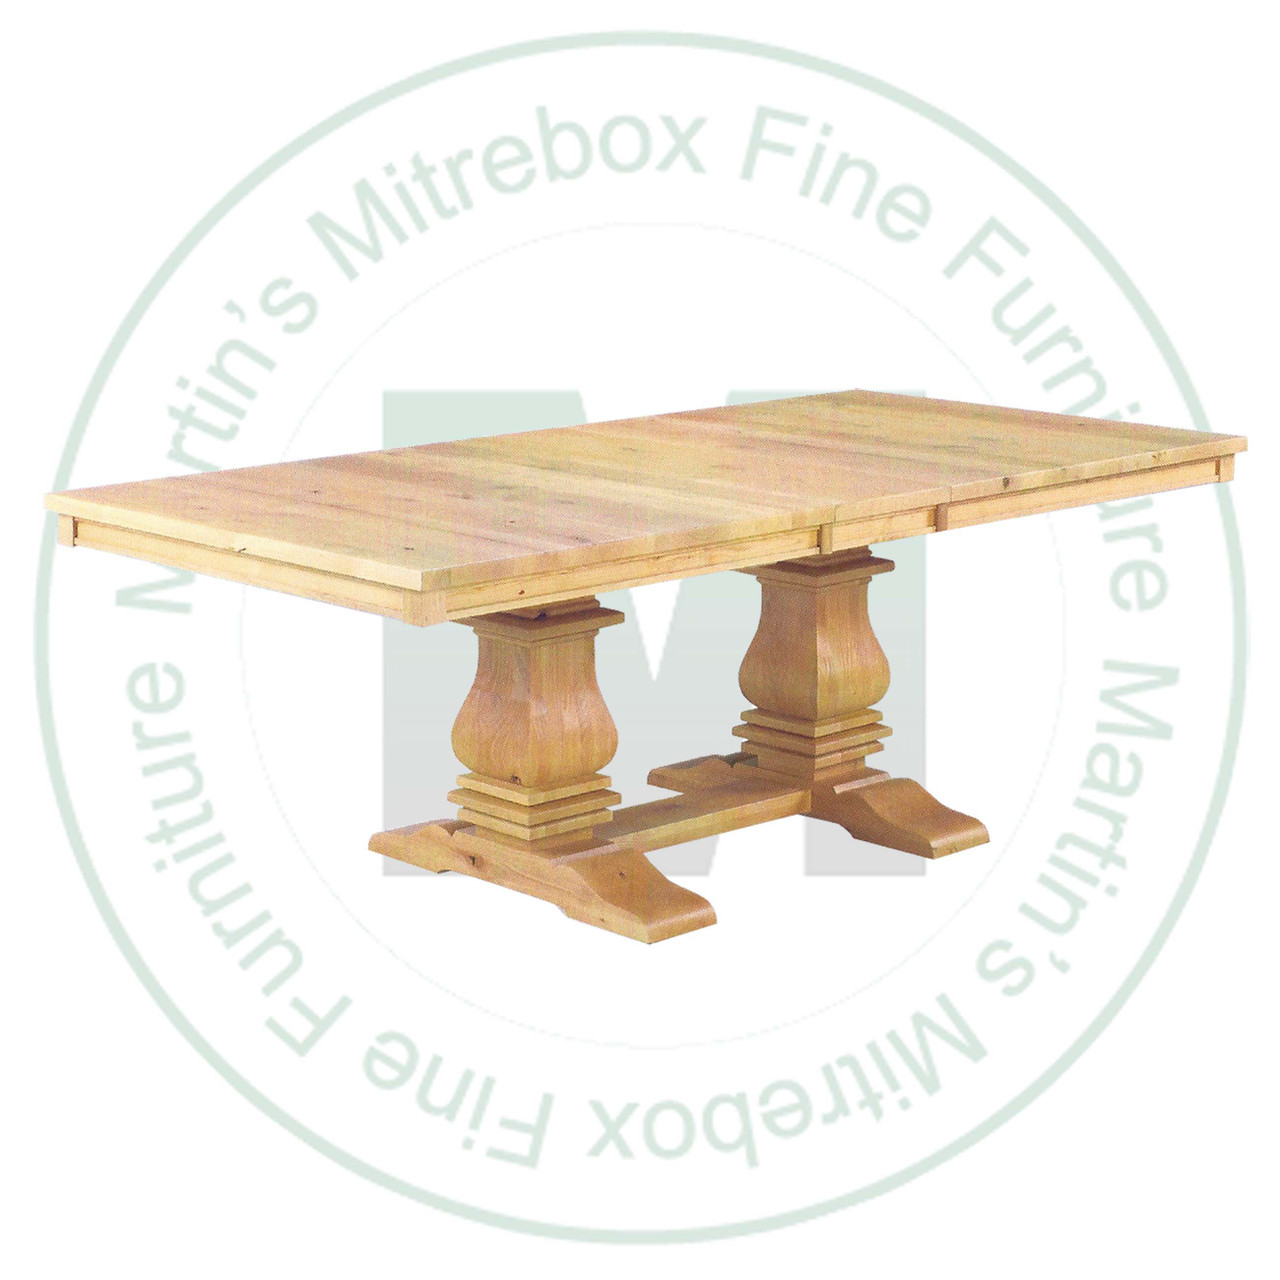 Oak Mediterranean Double Pedestal Table 42''D x 72''W x 30''H With 4 - 12'' Leaves. Table Has 1.25'' Thick Top